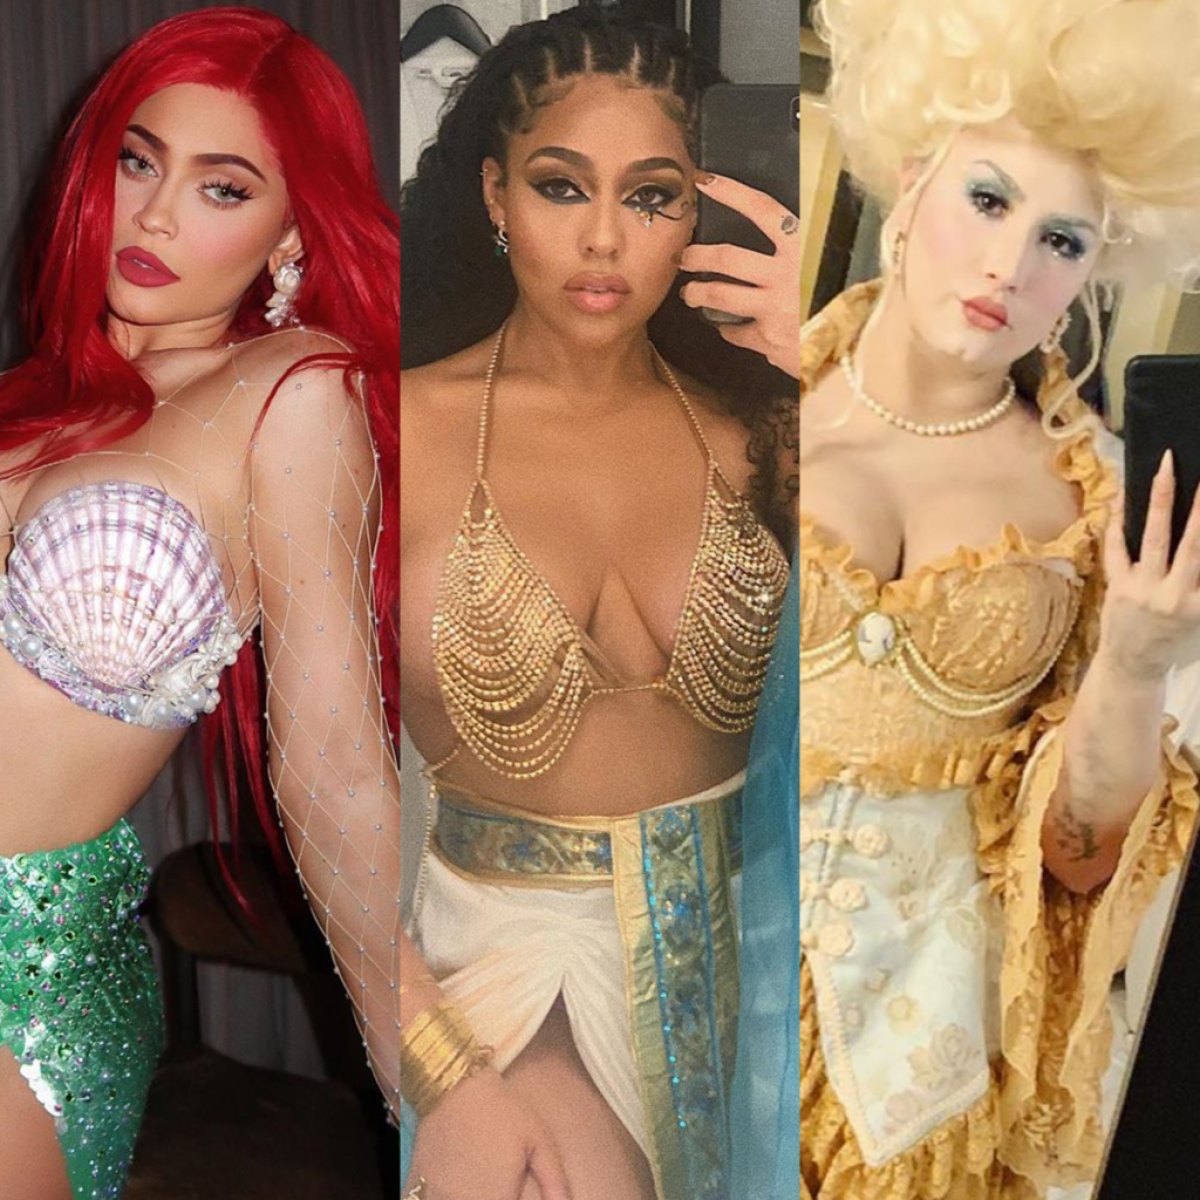 Celebrity Halloween Costumes 2019: See What Your Favorite Stars Wore